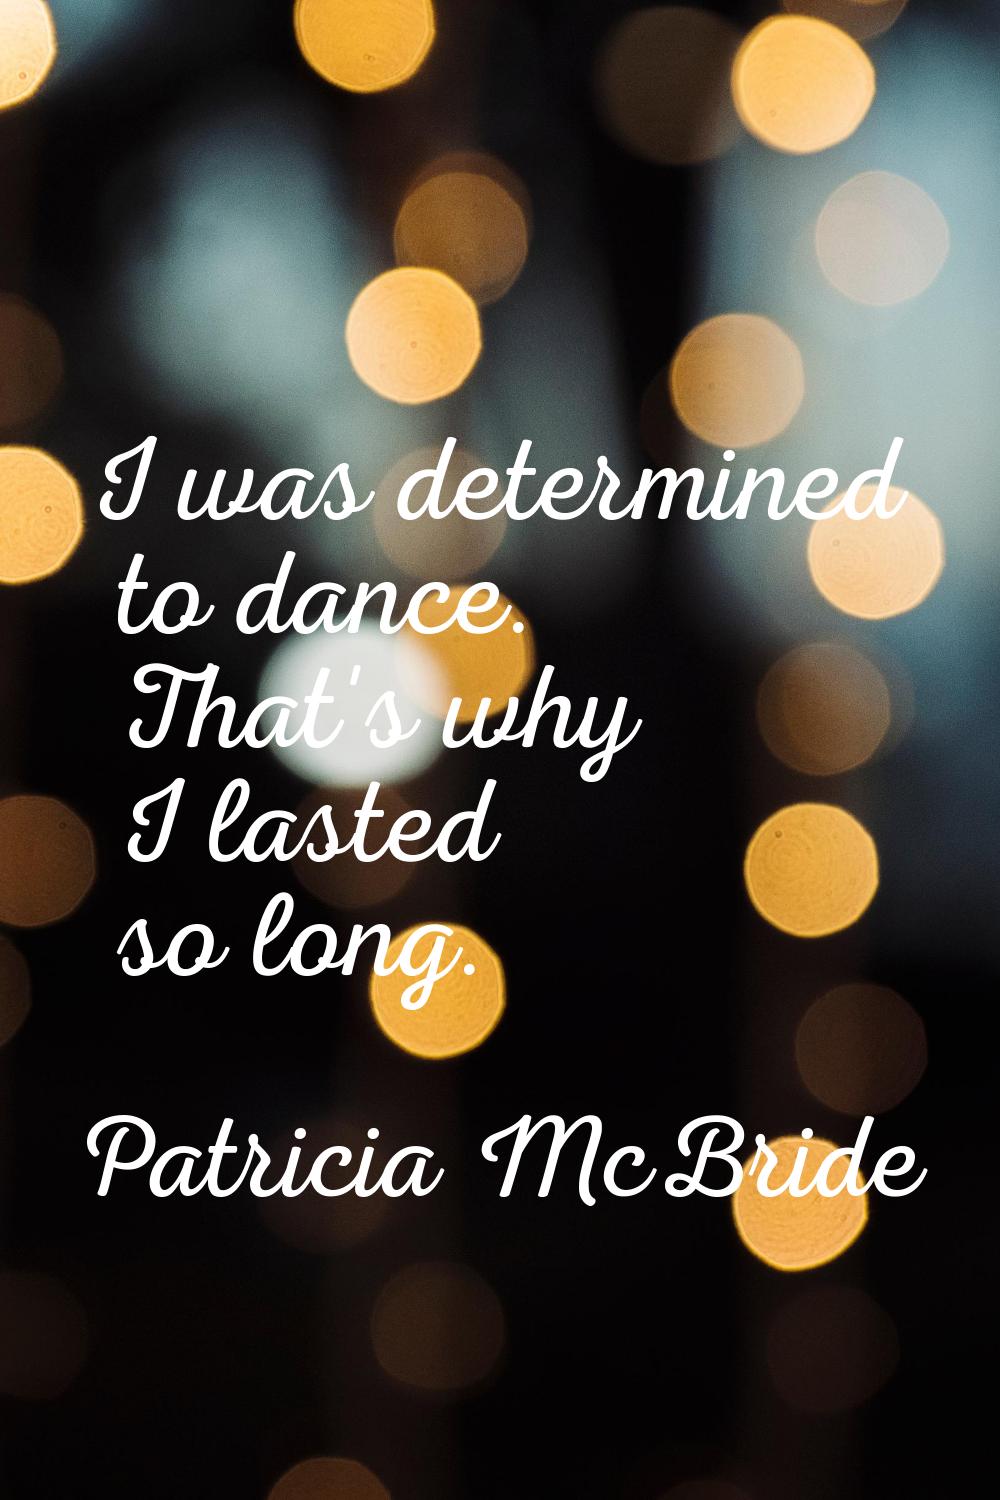 I was determined to dance. That's why I lasted so long.